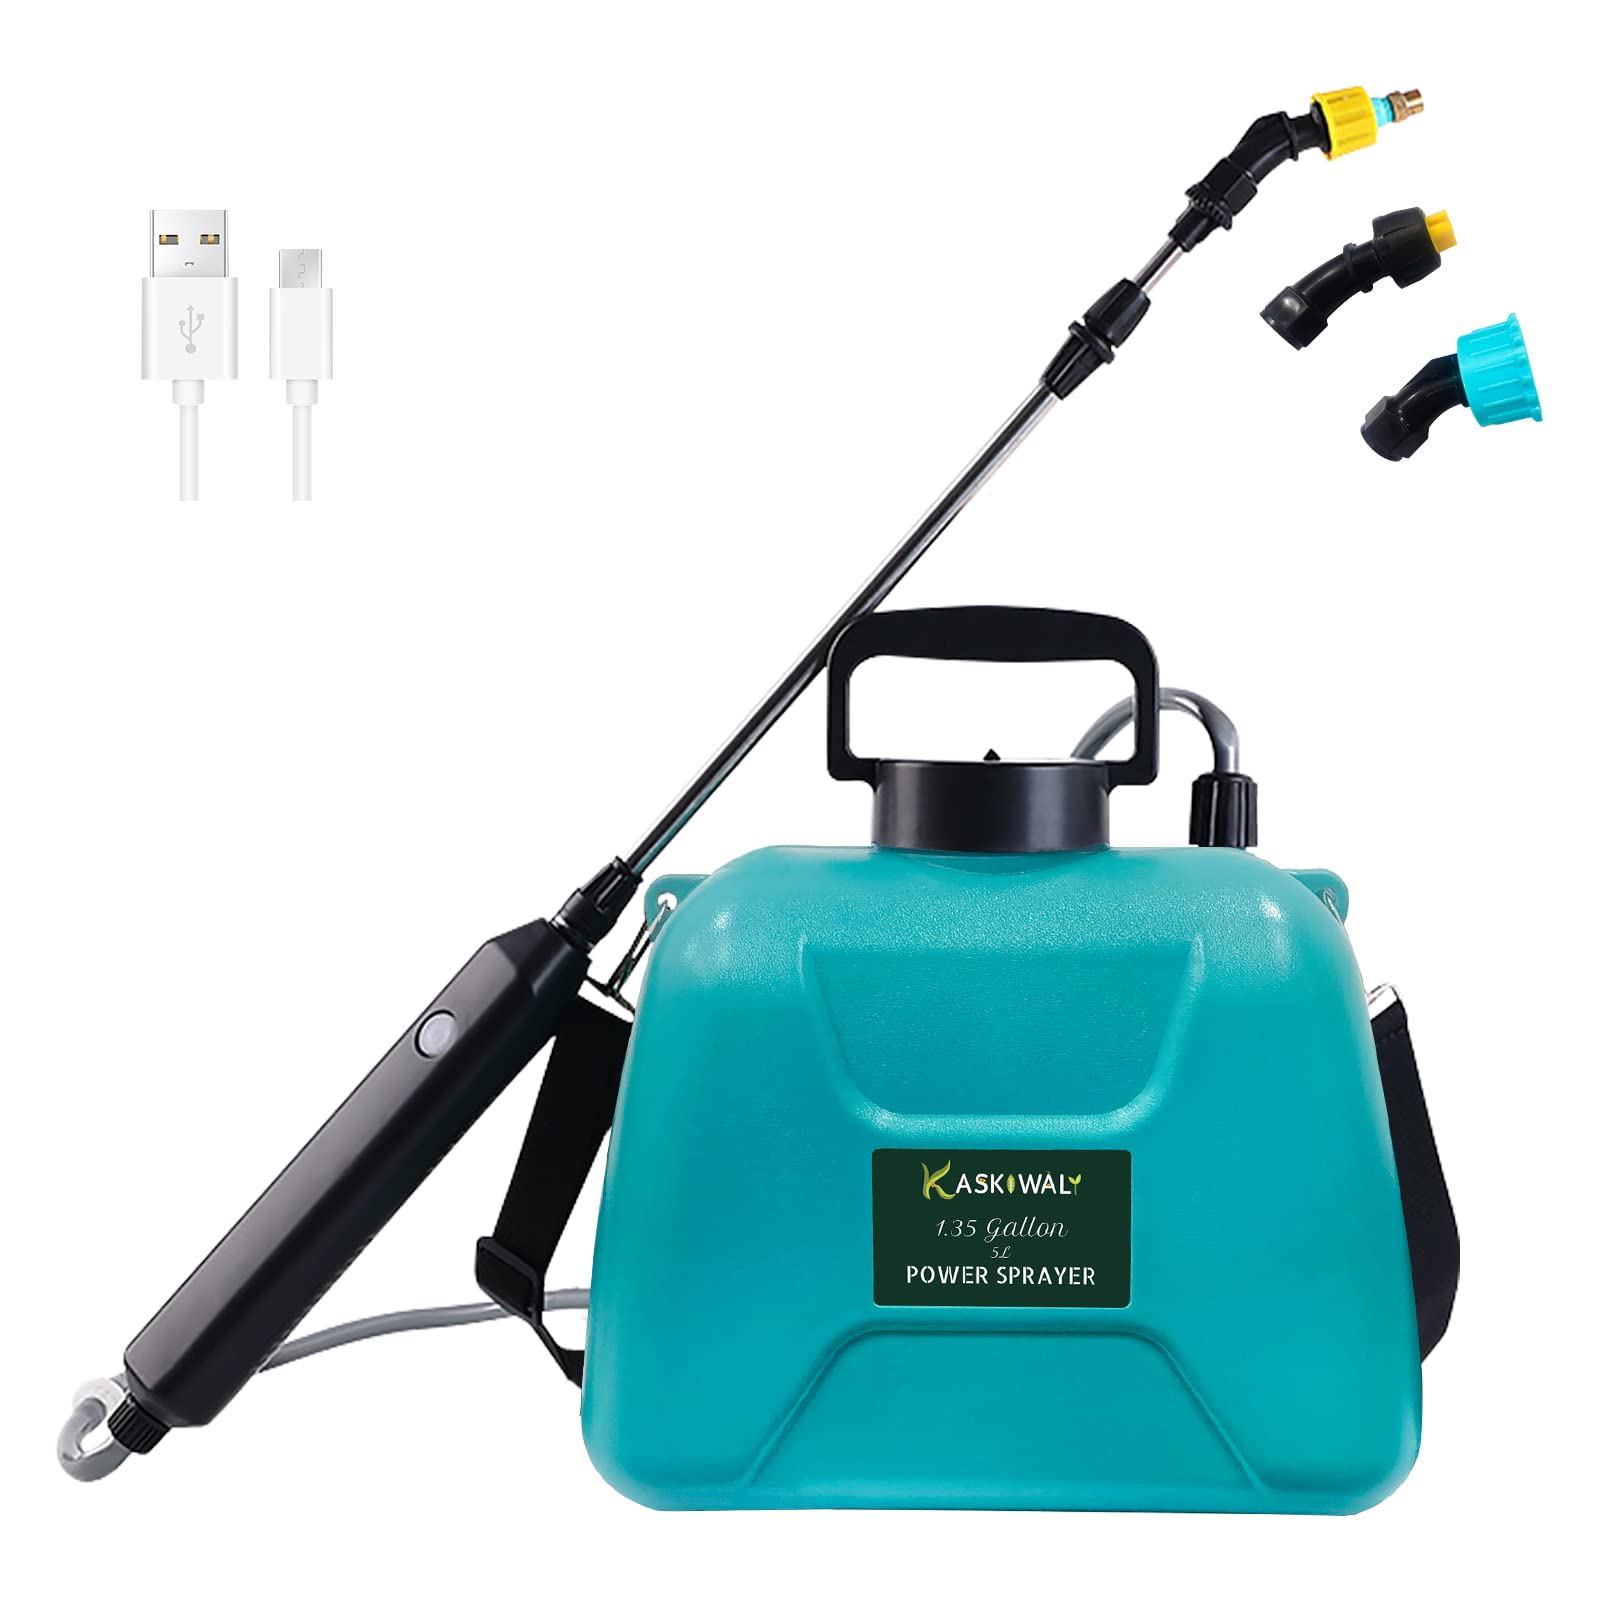 Kaskiwaly Battery Powered Garden Sprayer with 3 Mist Nozzles, 1.35 Gal Lawn Water Sprayer with USB Rechargeable Handle and Telescopic Wand